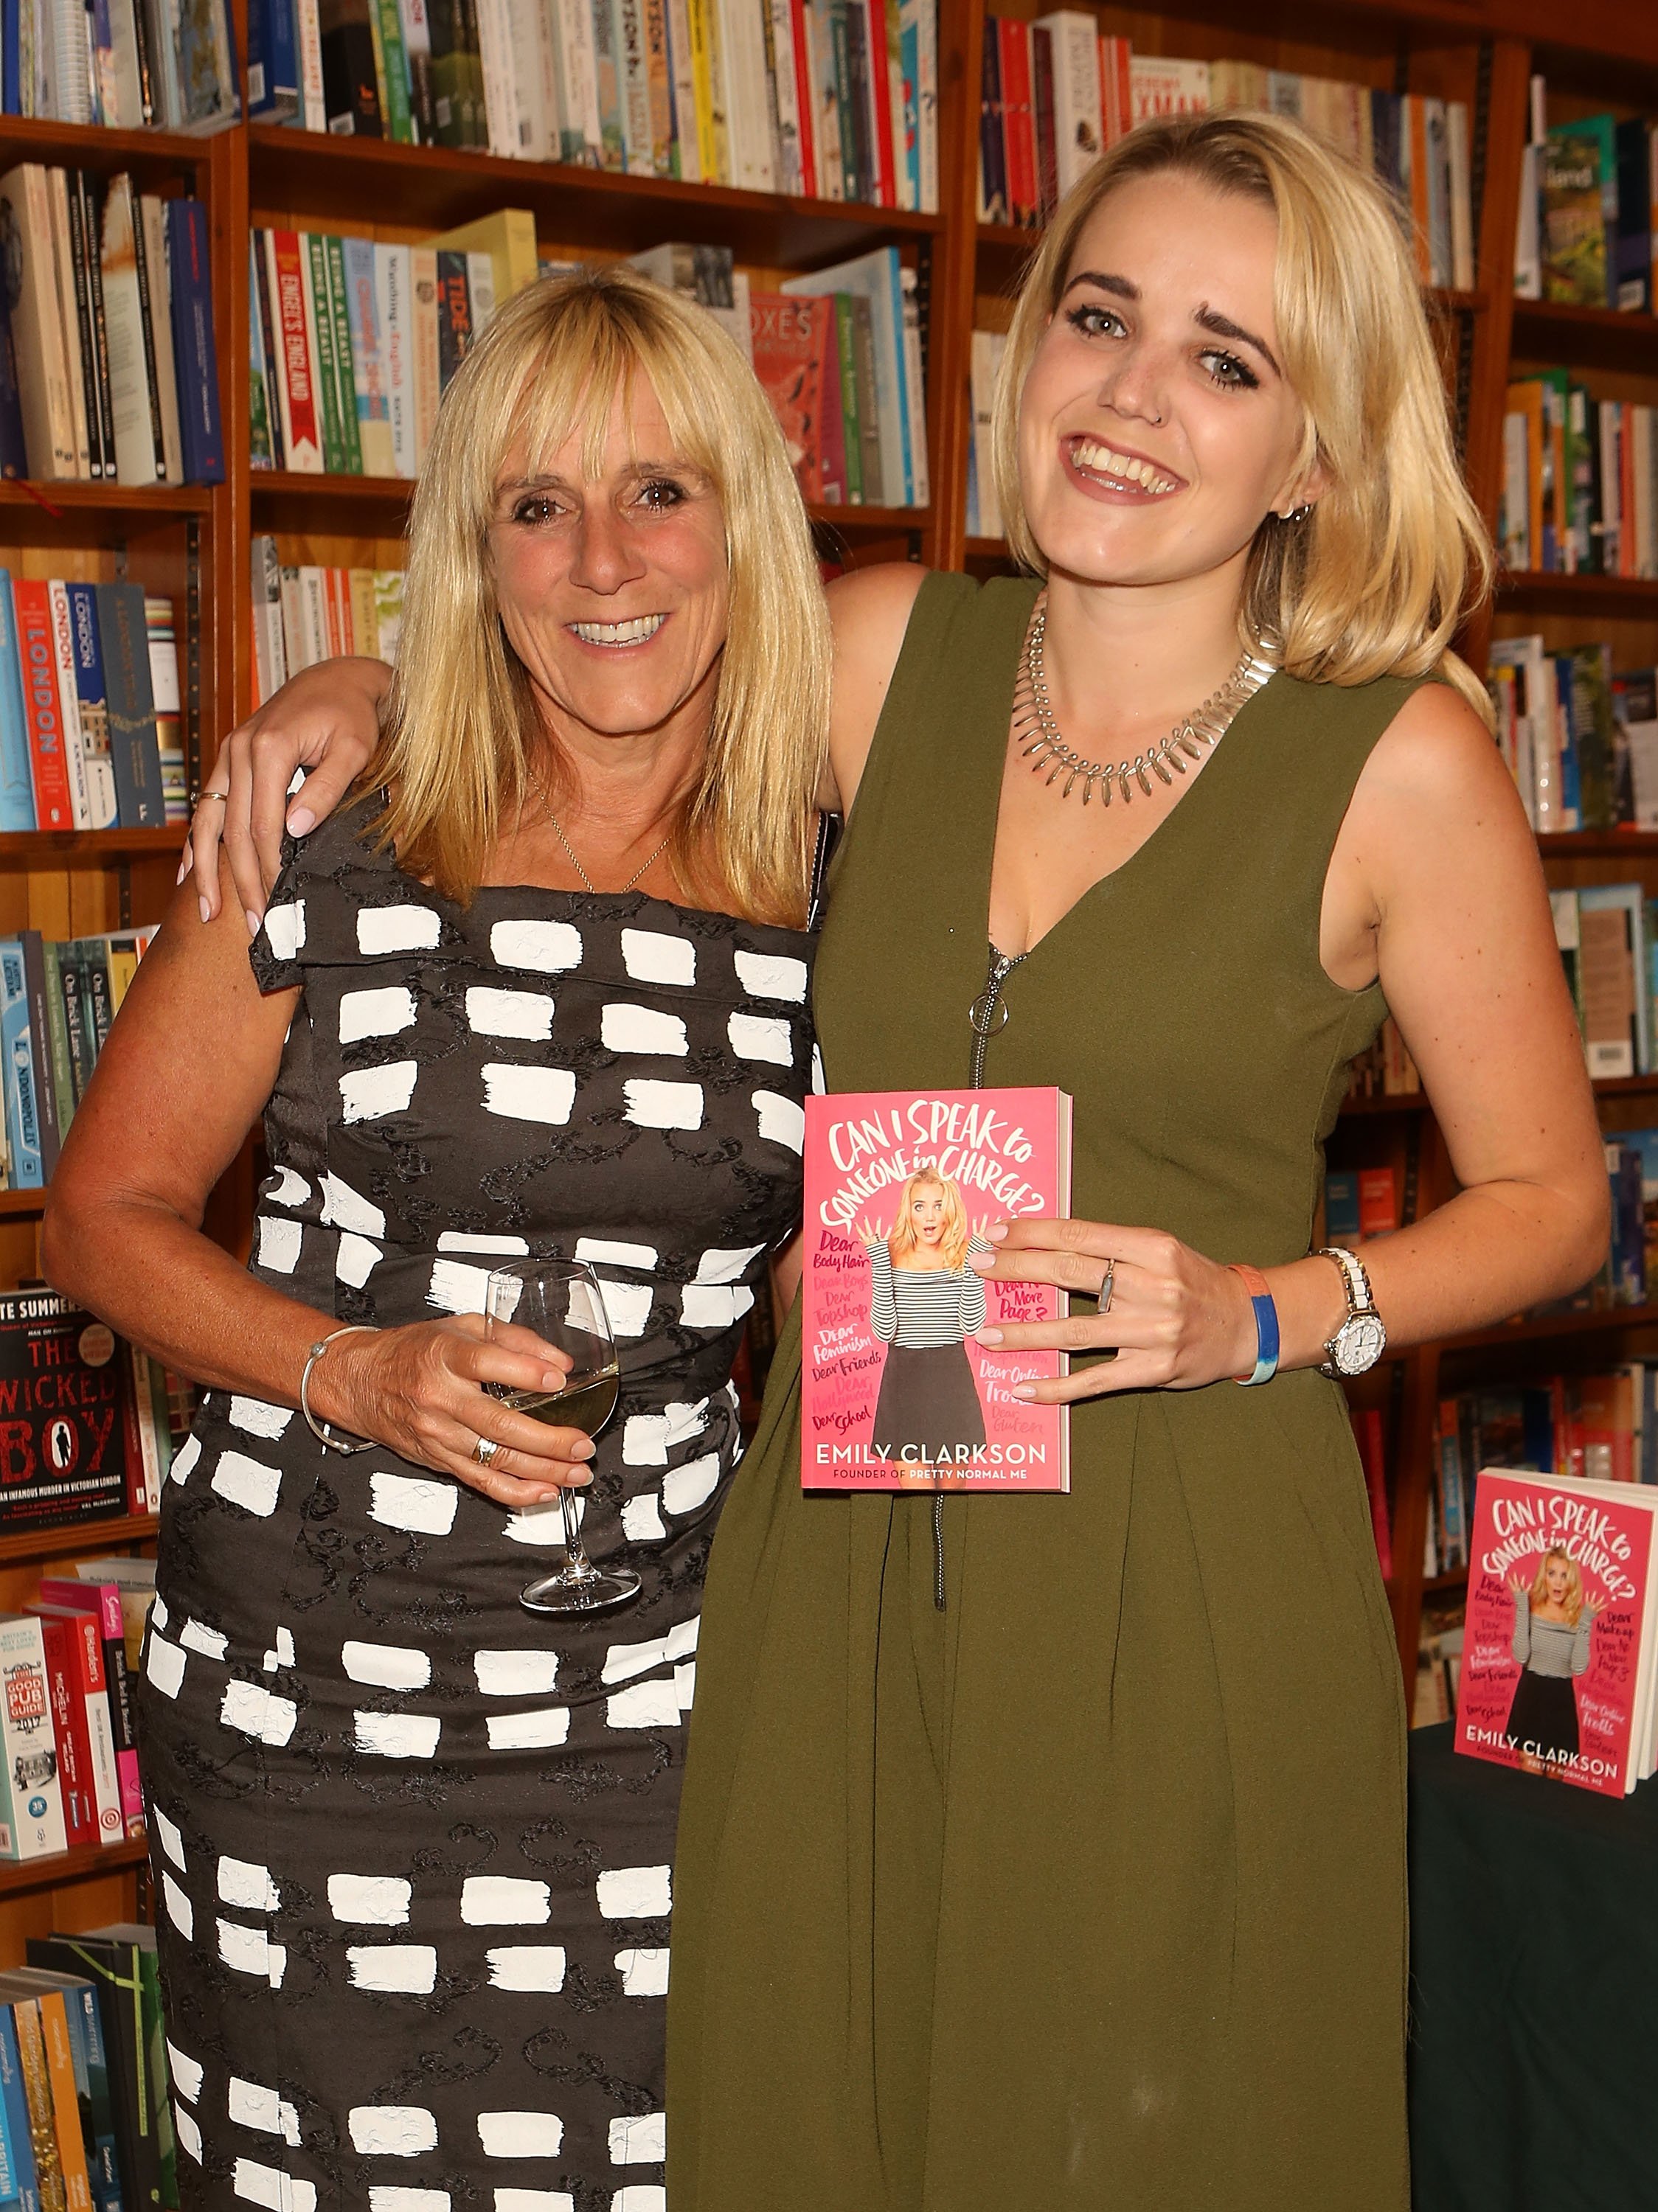  Frances Cain and Emily Clarkson pose at the launch of Emily Clarkson's first book 'Can I Speak to Someone in Charge?' at Daunt Books on July 13, 2017, in London, England | Source: Getty Images